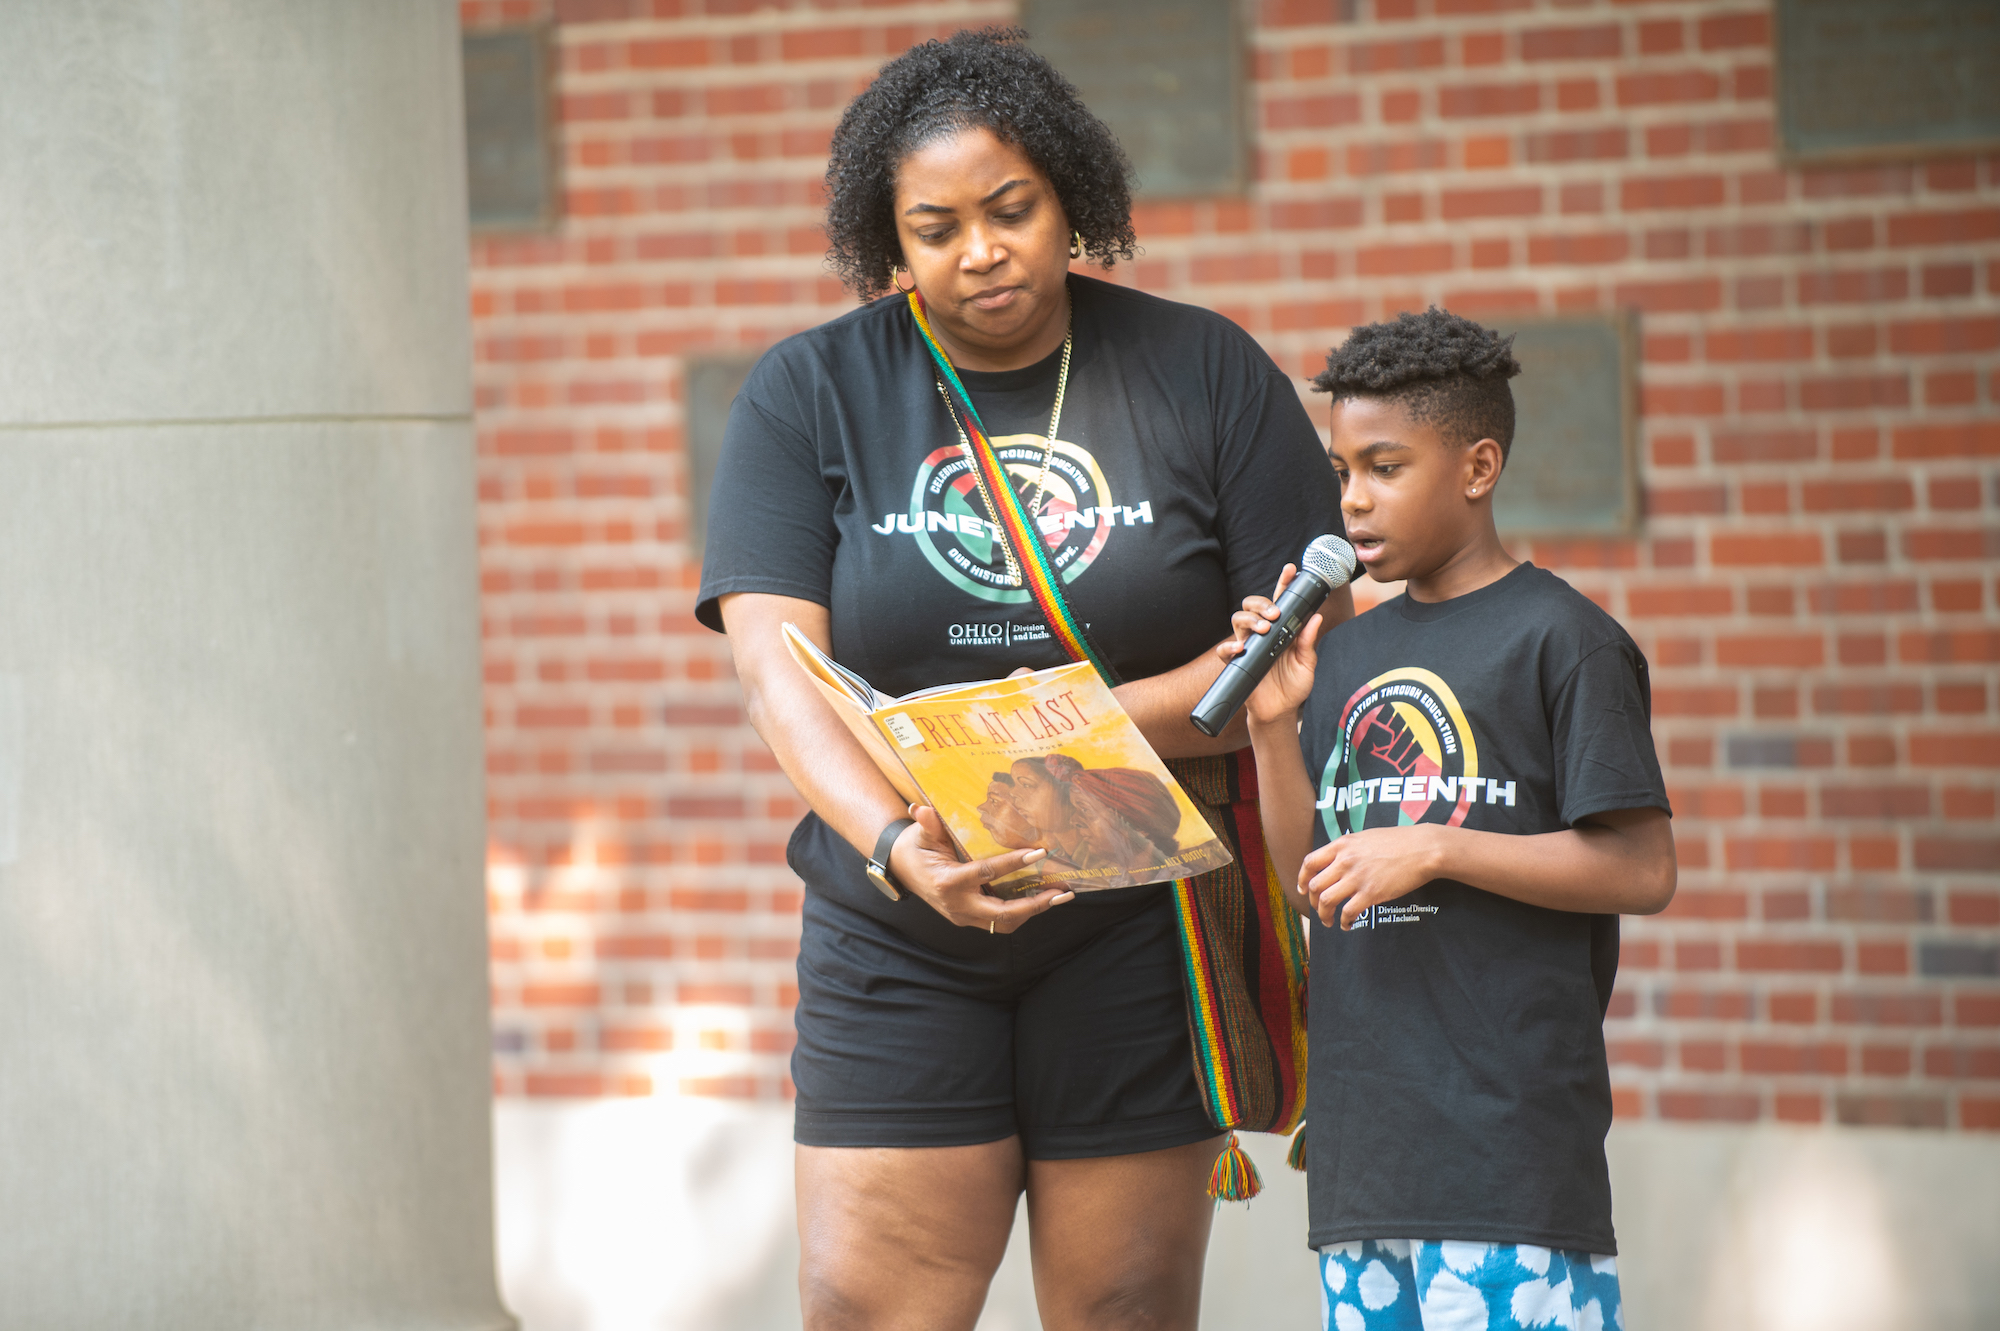 Tia Jameson, Assistant Athletics Director of Student-Athlete Development and Inclusion and member of the 2023 Juneteenth Planning Committee, assisted her nephew in a reading of “Free at Last: A Juneteenth Poem” written by Sojourner Kincaid Rolle. 